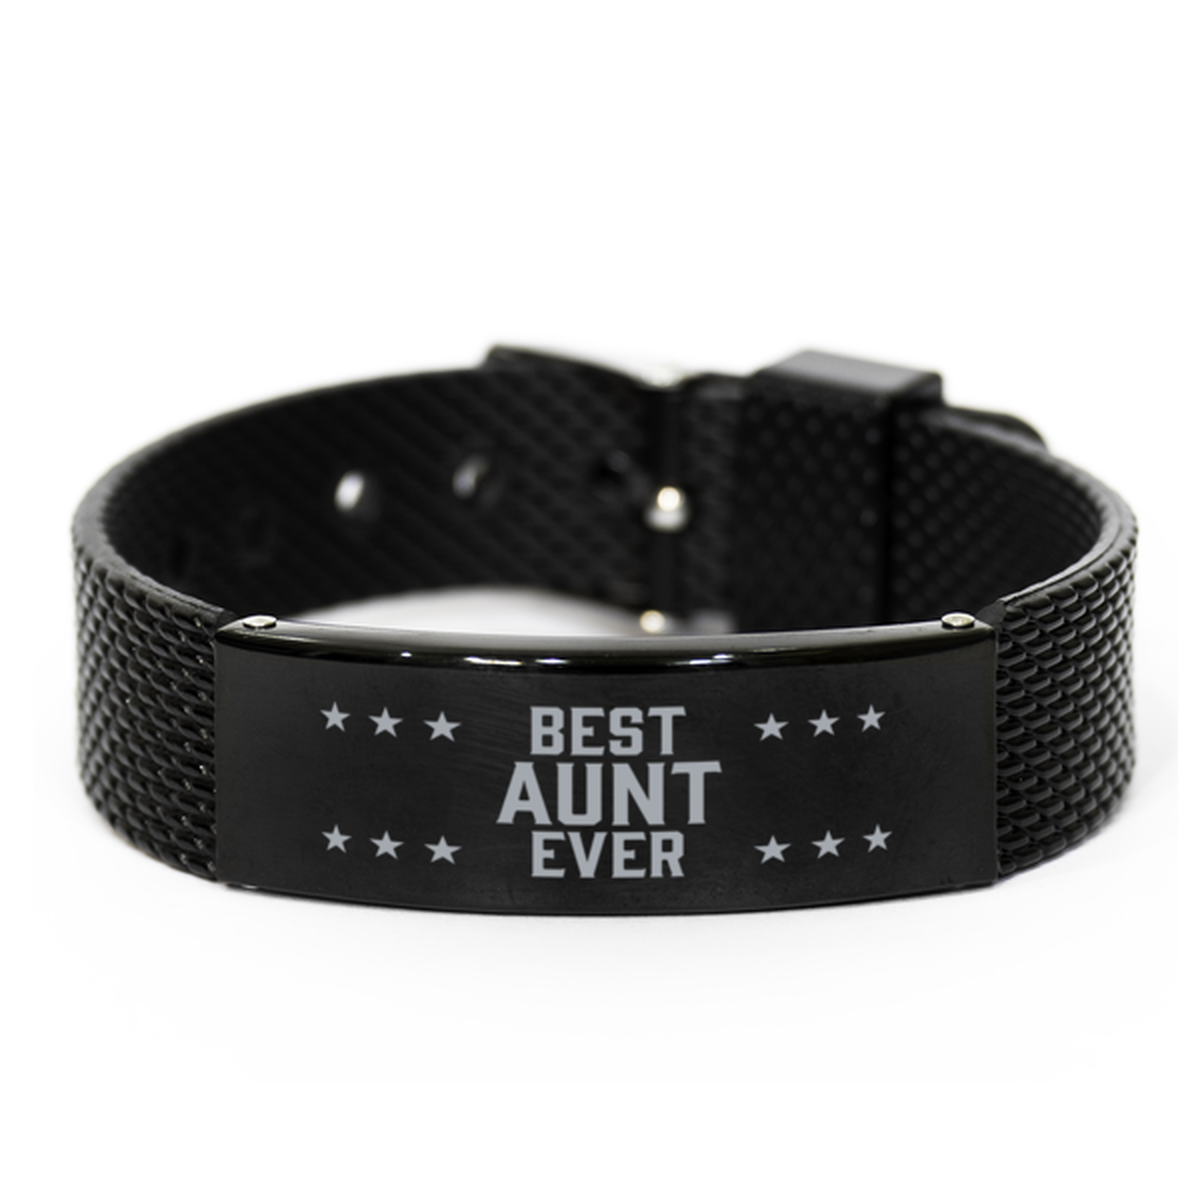 Best Aunt Ever Aunt Gifts, Gag Engraved Bracelet For Aunt, Best Family Gifts For Women